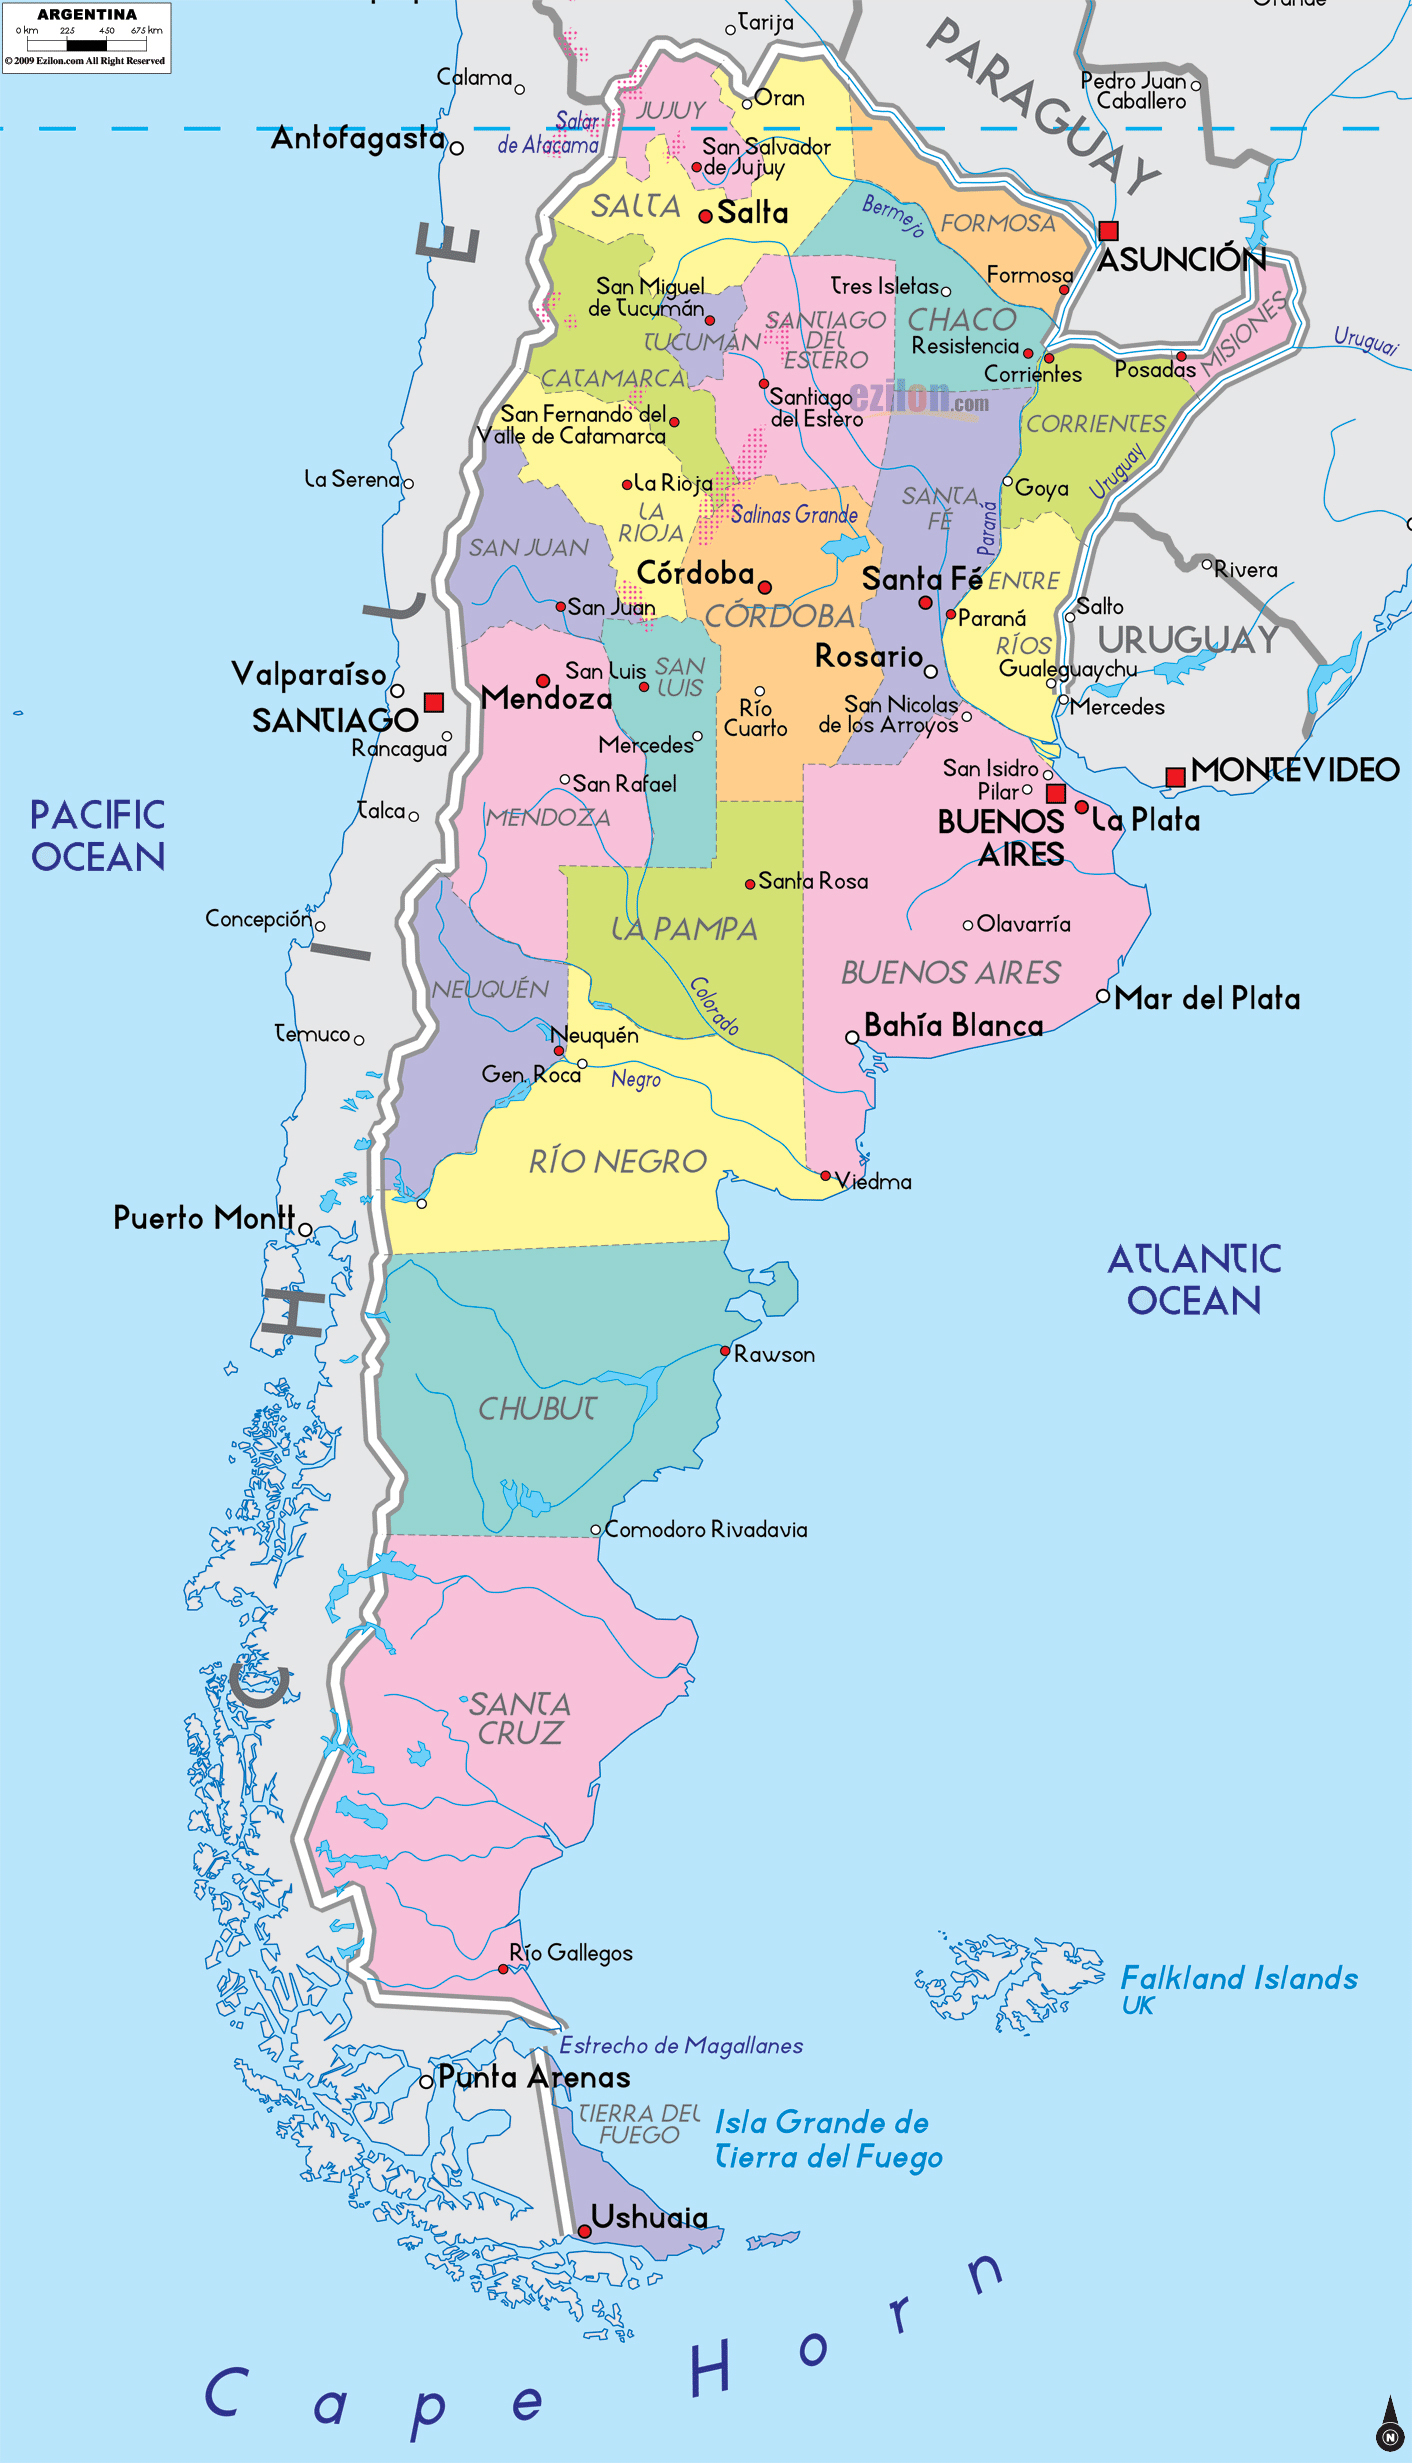 large-detailed-administrative-and-political-map-of-argentina-argentina